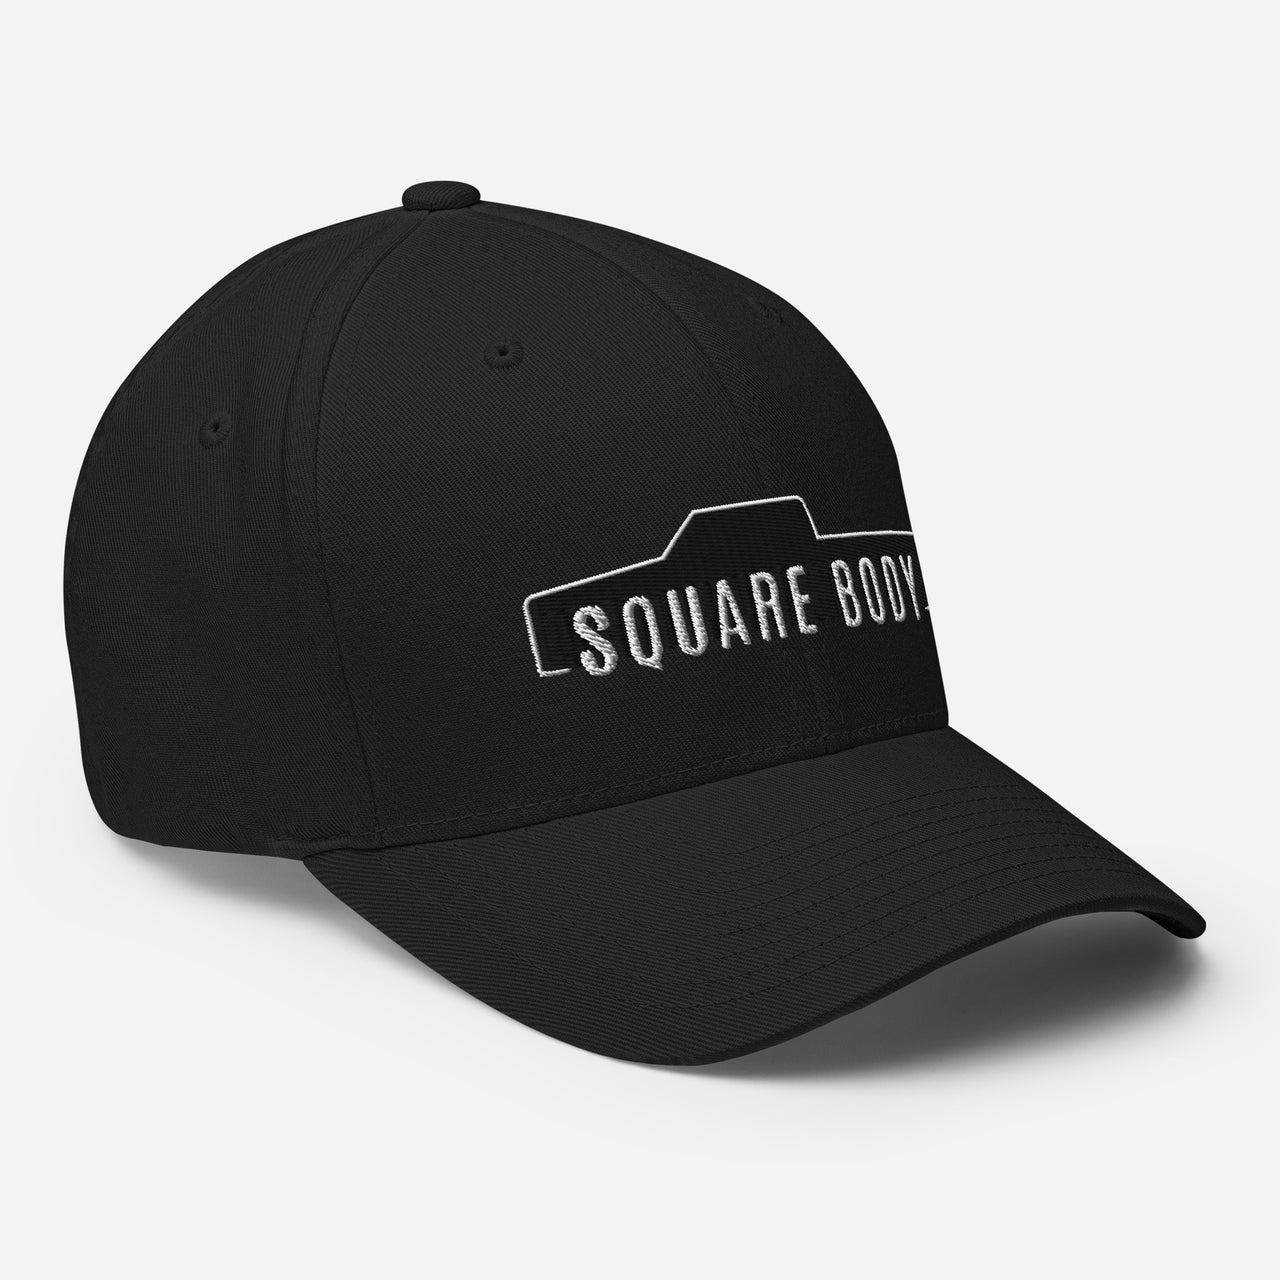 3/4 View of crew cab Square Body Hat From Aggressive Thread in Black